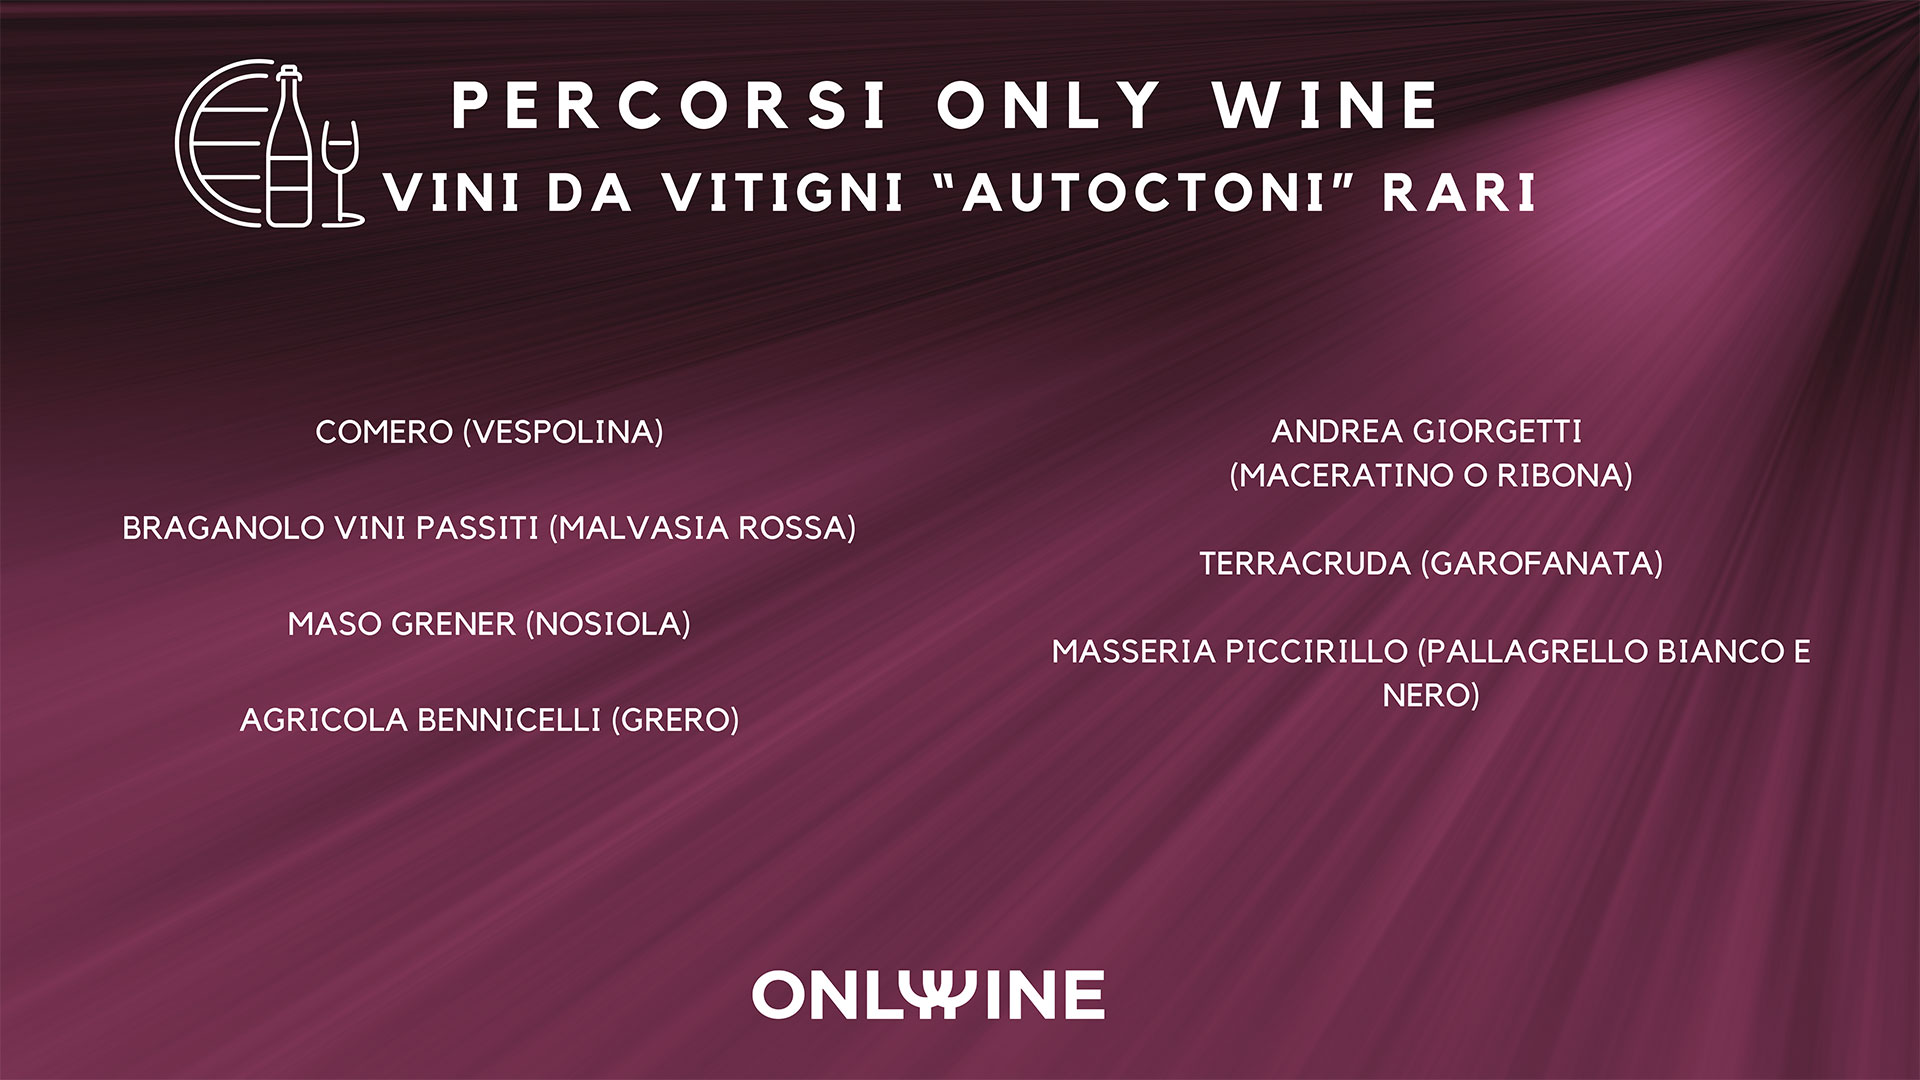 PERCORSI-ONLY-WINE-1